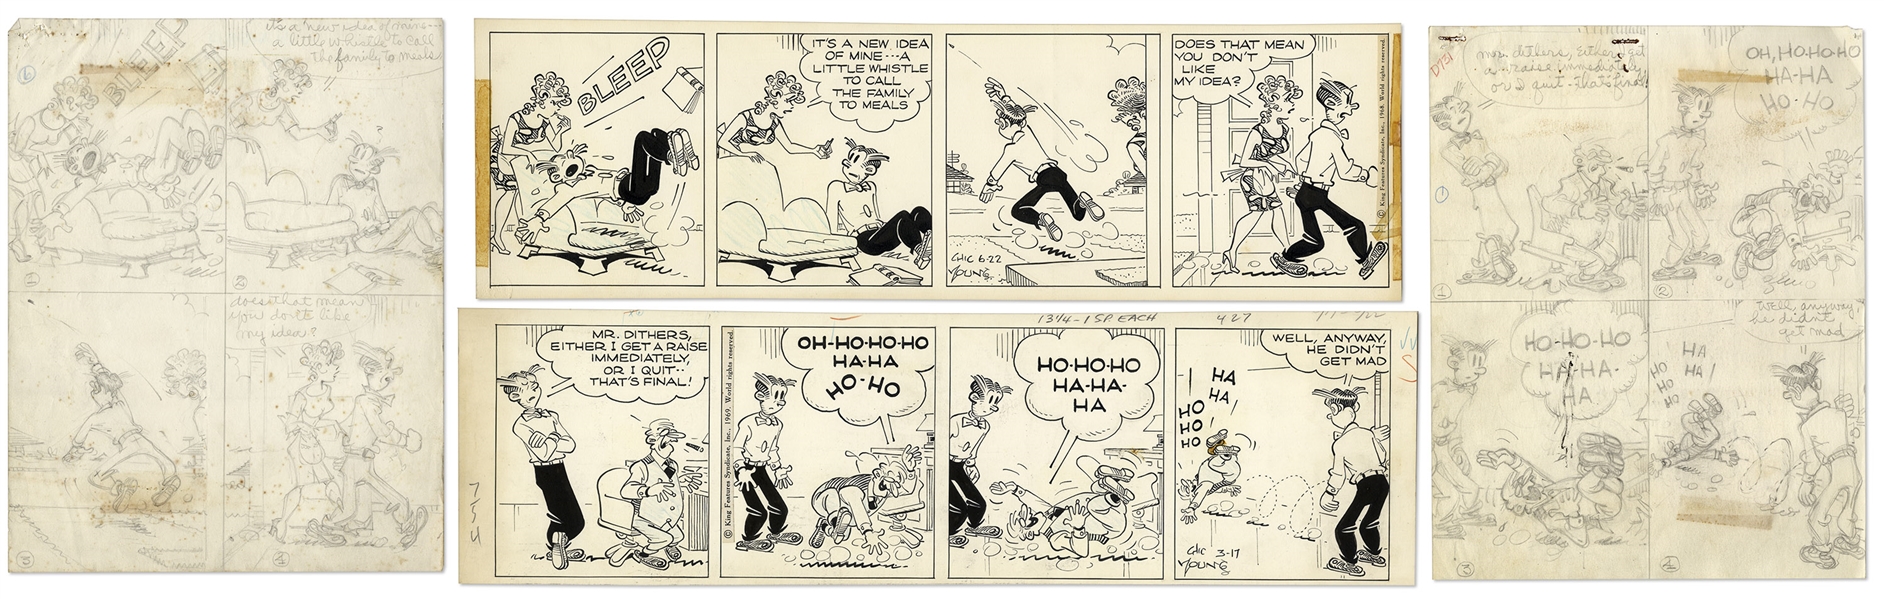 2 Chic Young Hand-Drawn ''Blondie'' Comic Strips From 1968 & 1969 -- With Chic Young's Original Artwork for Both